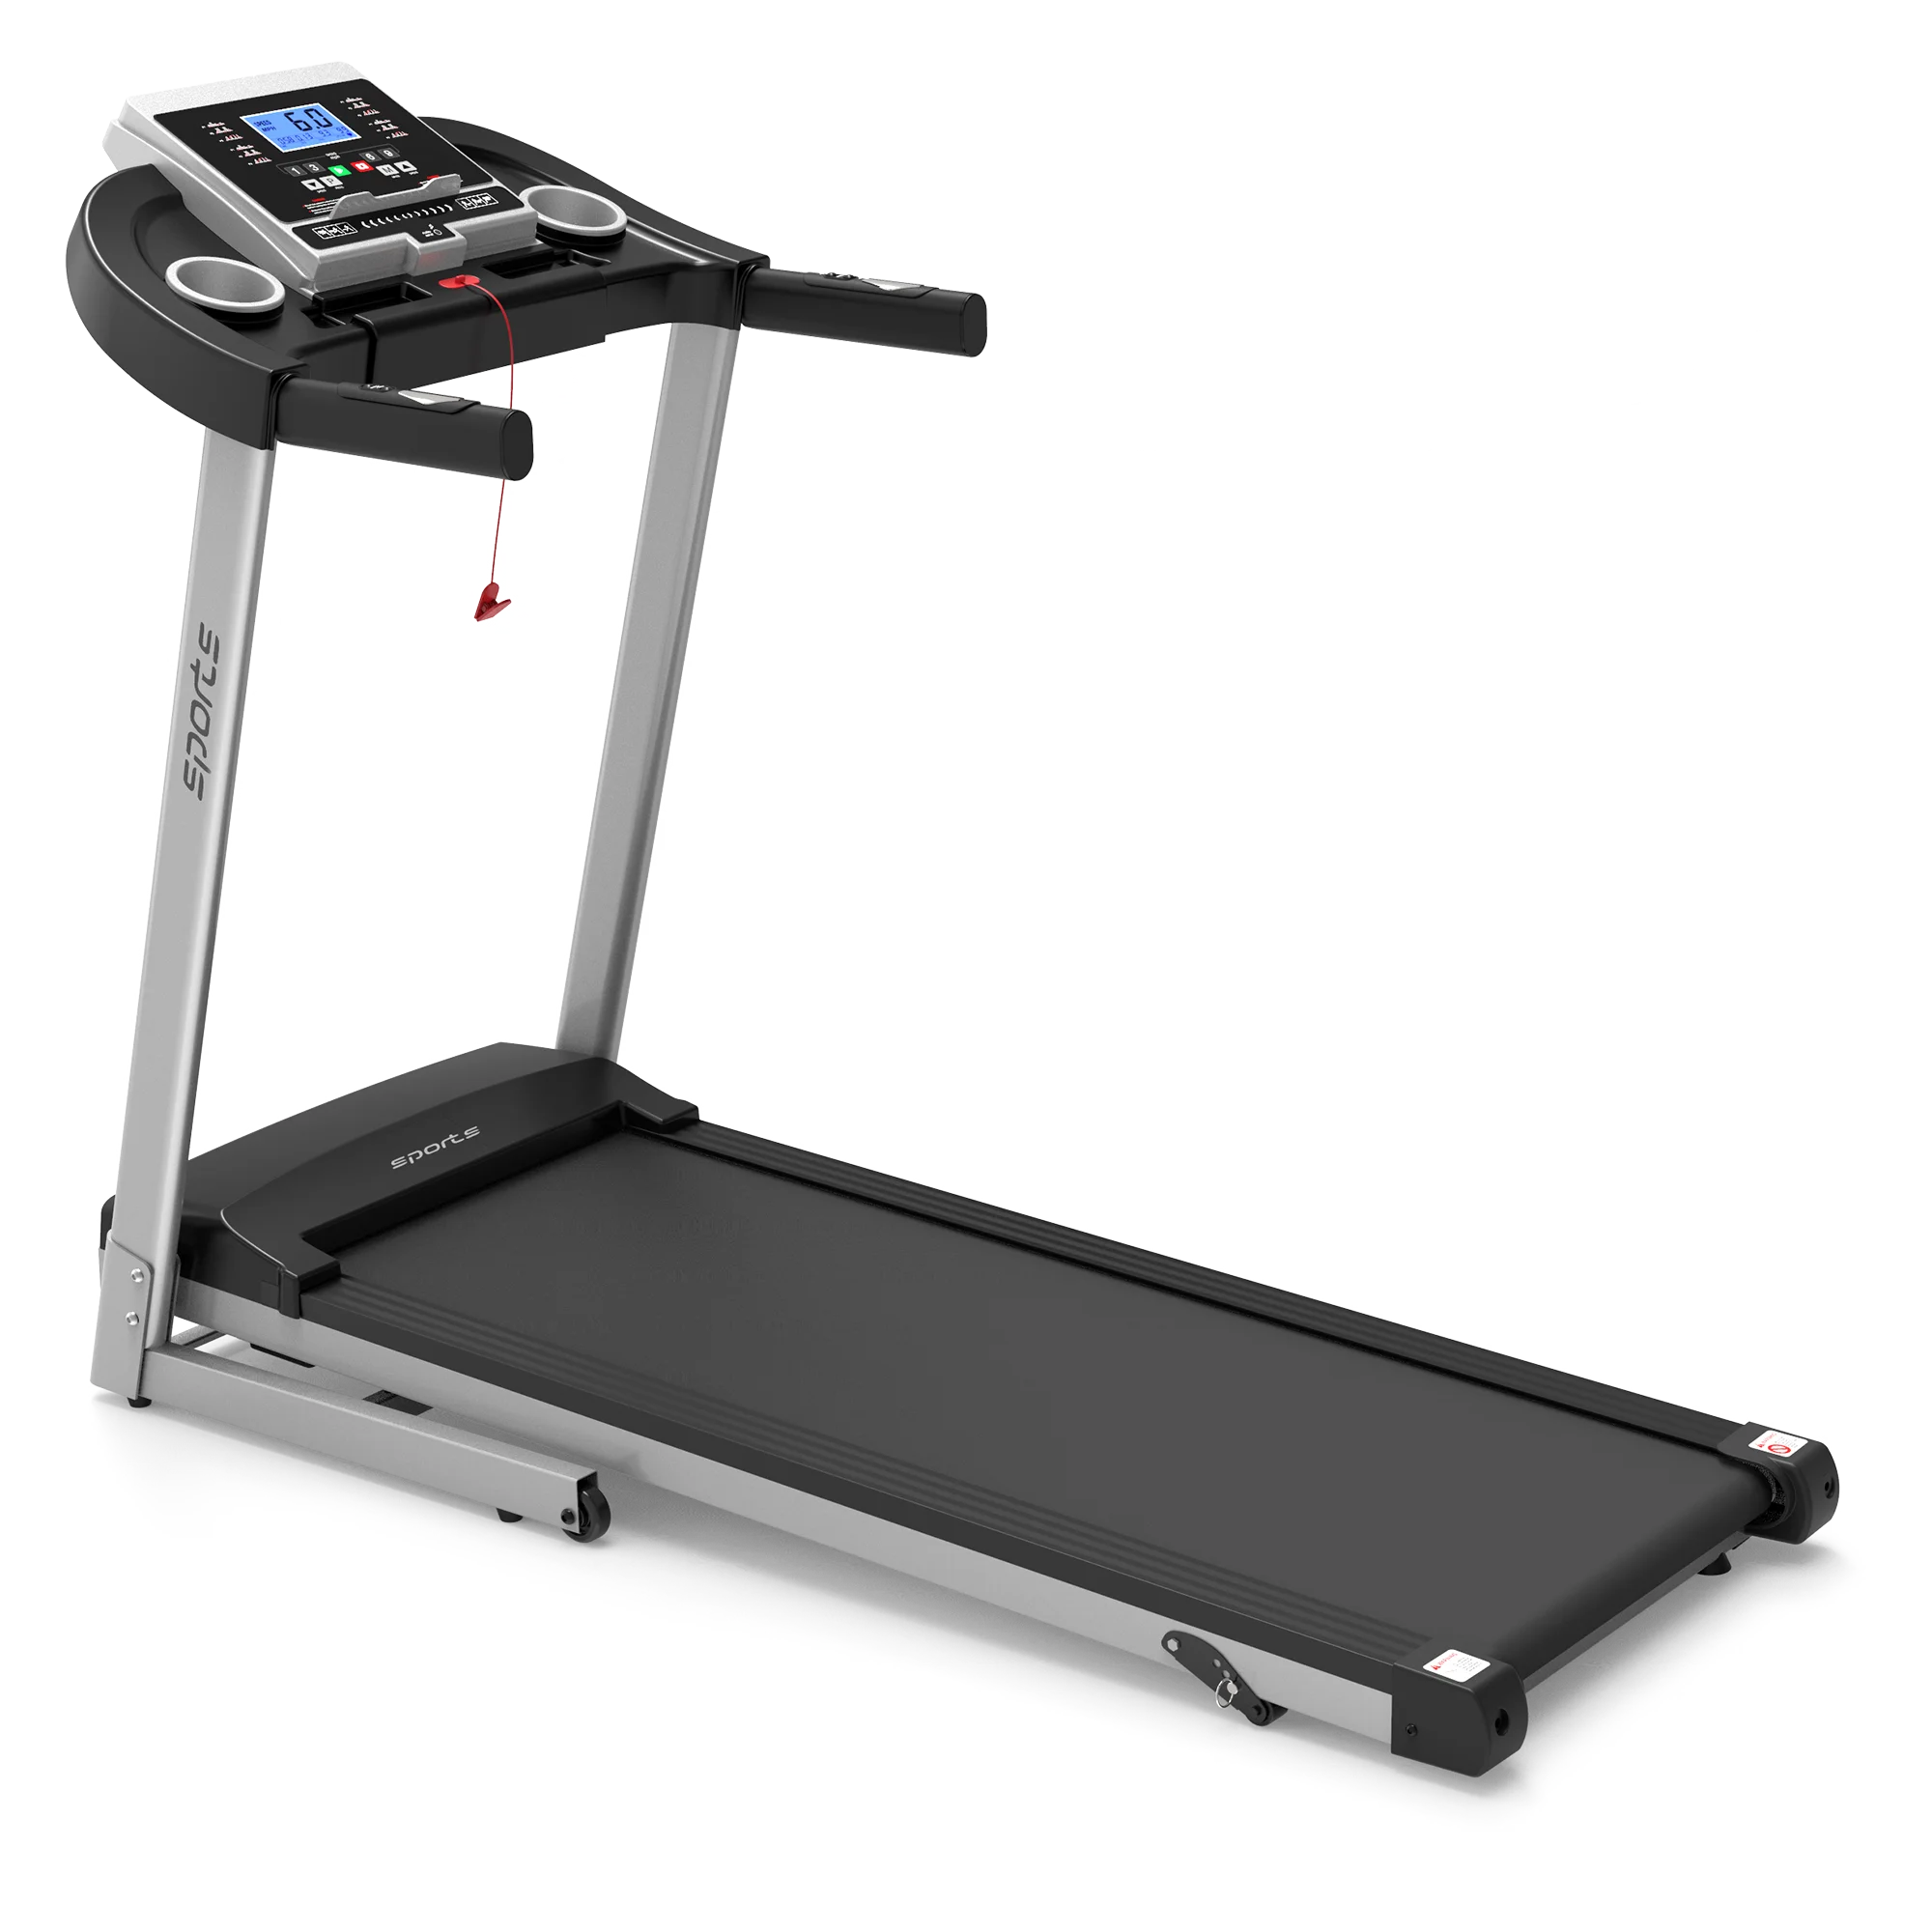 

Folding Electric Treadmill for Home Workout Manual Incline Running Machine 3.5" LCD Display 9 MPH MAX